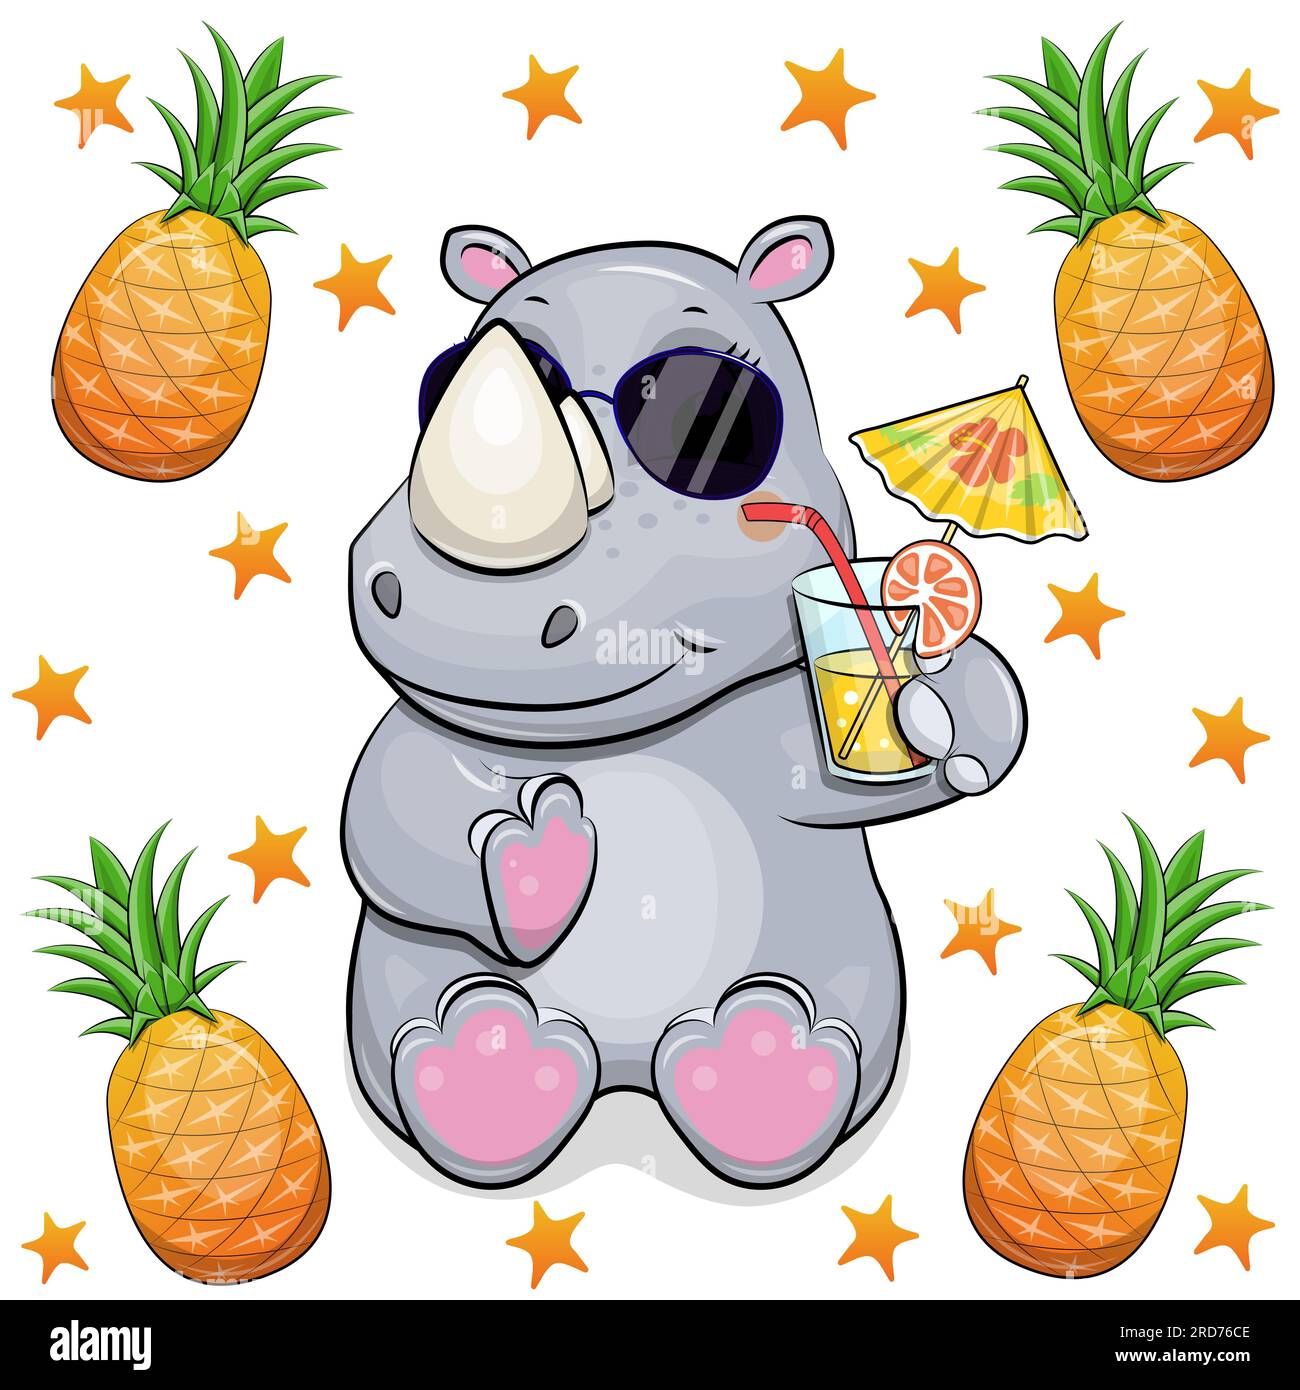 Cute cartoon rhinoceros with black sunglasses and lemonade. Summer animal vector illustration with pineapples and stars on white background. Stock Vector